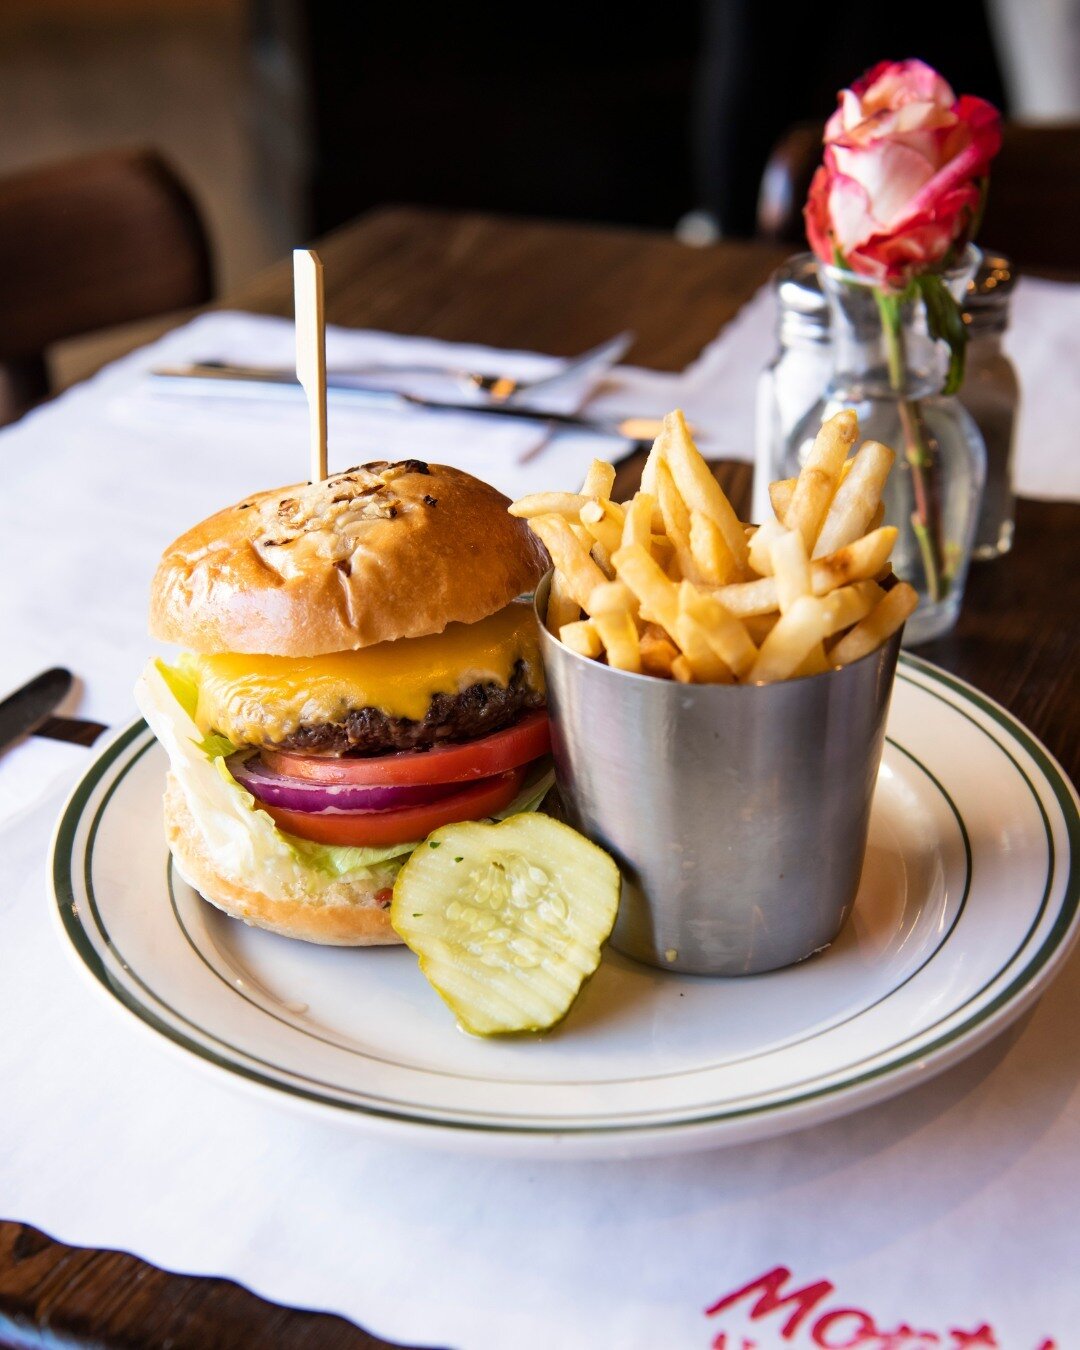 Monte's Classic Cheeseburger hits the spot every time. Available for Lunch and Dinner. ⁠
⁠
Pictured: Onion Brioche, Gruyere, Premium Ground Beef, and Truffle Parmesan Fries.⁠
⁠
#cheeseburger #montauk #montesatthemanor